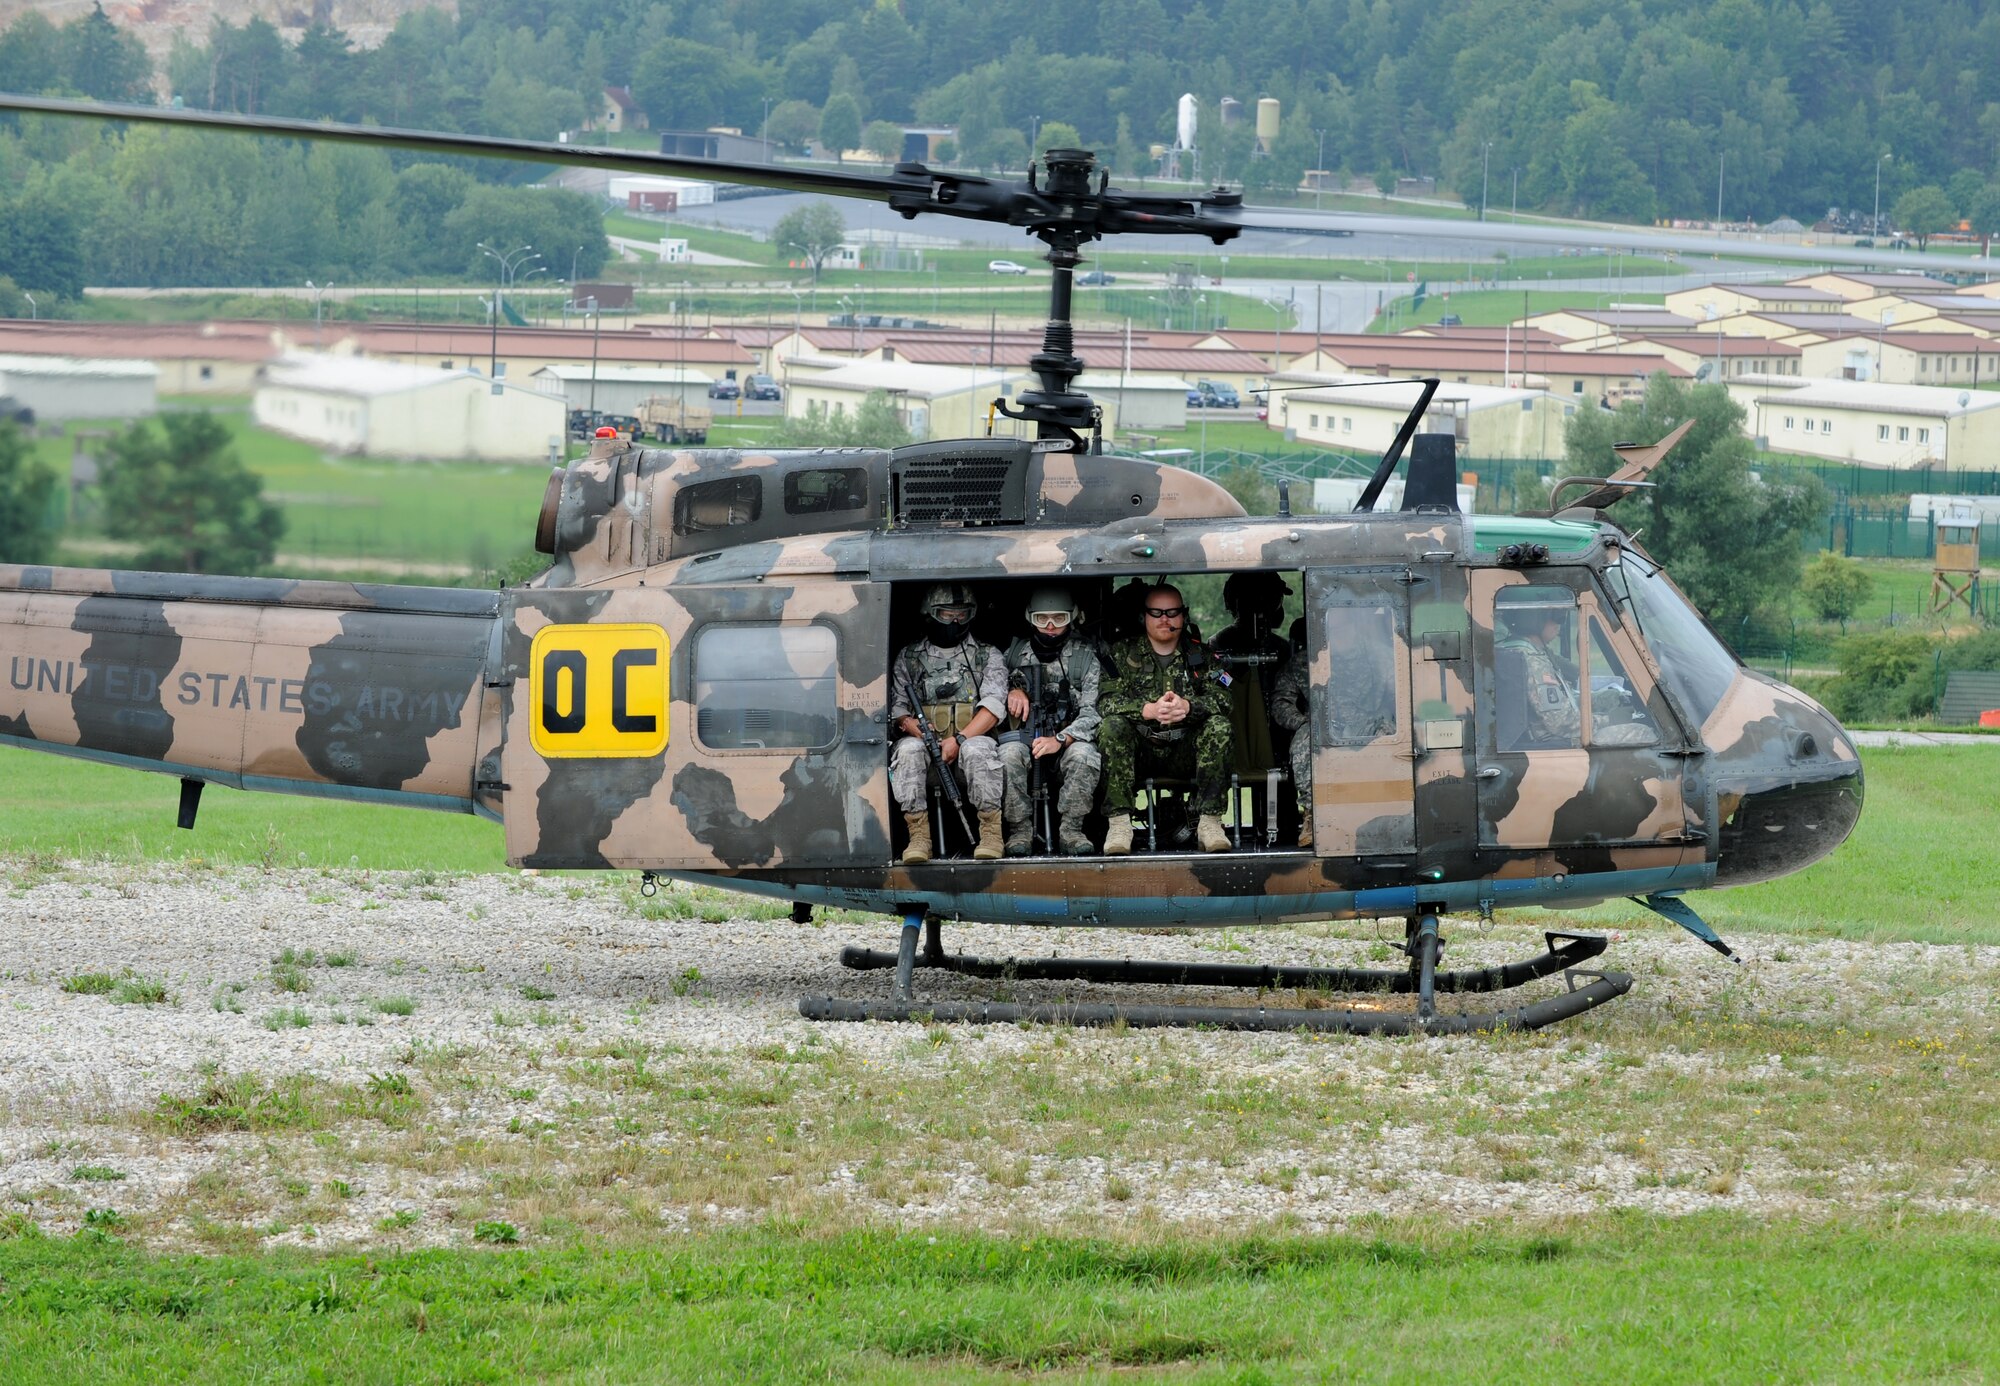 U.S. Air Force, Army and North Atlantic Treaty Organization's (NATO) members prepare to take off for an air assault mission scenario during exercise ALLIED STRIKE 10, Hohenfels, Germany, Aug. 3, 2010. AS 10 is Europe's premier close air support (CAS) exercise, held annually to conduct robust, realistic CAS training that helps build partnership capacity among allied NATO nations and joint services while refining the latest operational CAS tactics. For more ALLIED STRIKE information go to www.usafe.af.mil/alliedstrike.asp. (U.S. Air Force photo by Senior Airman Caleb Pierce)